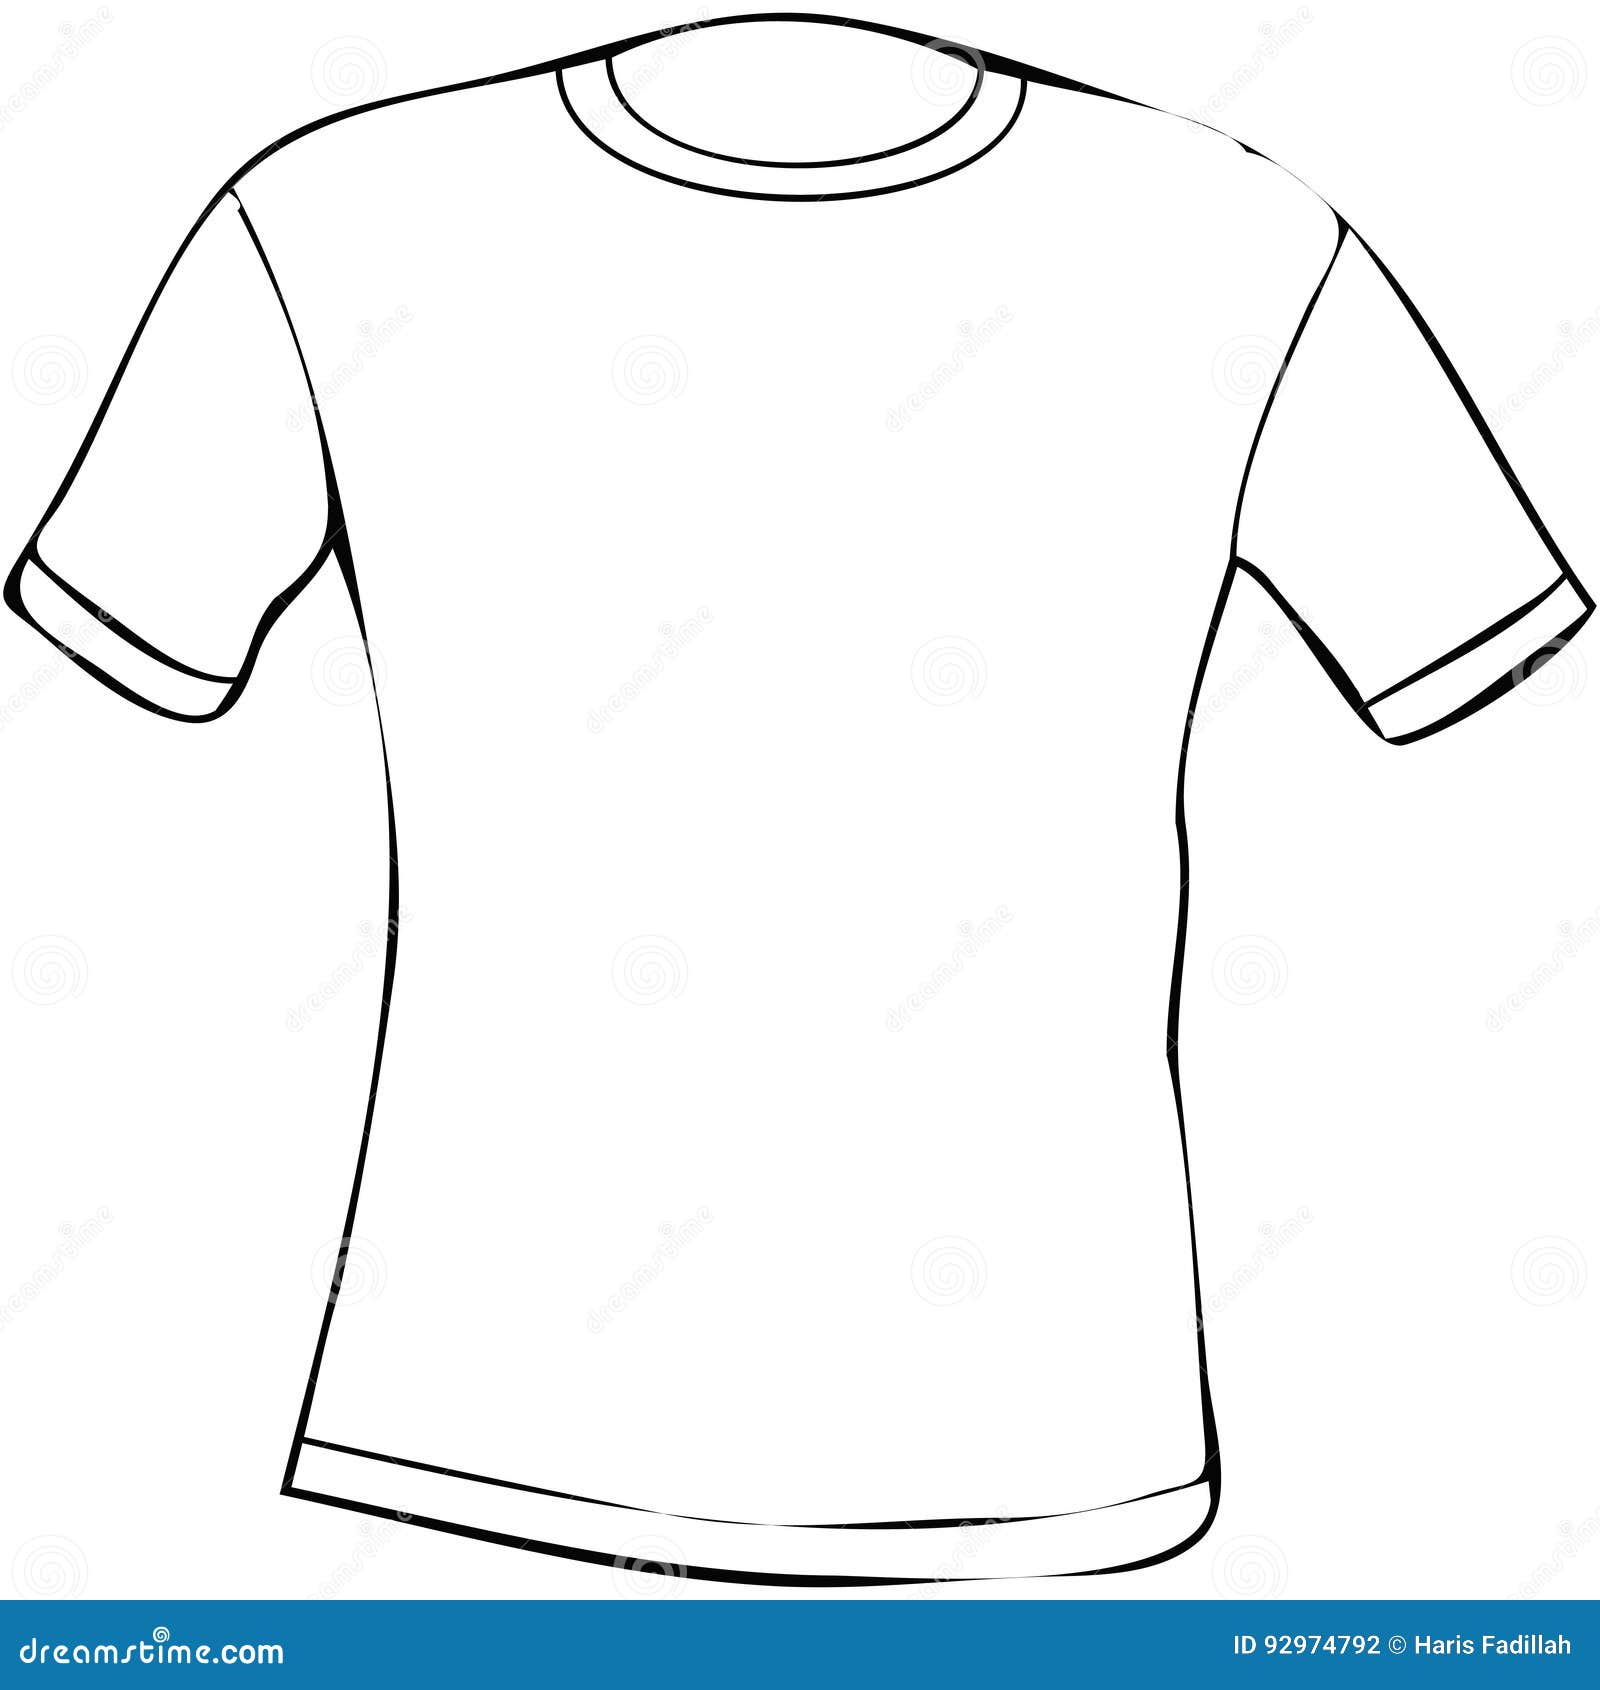 T shirt stock vector. Illustration of blue, collections - 92974792